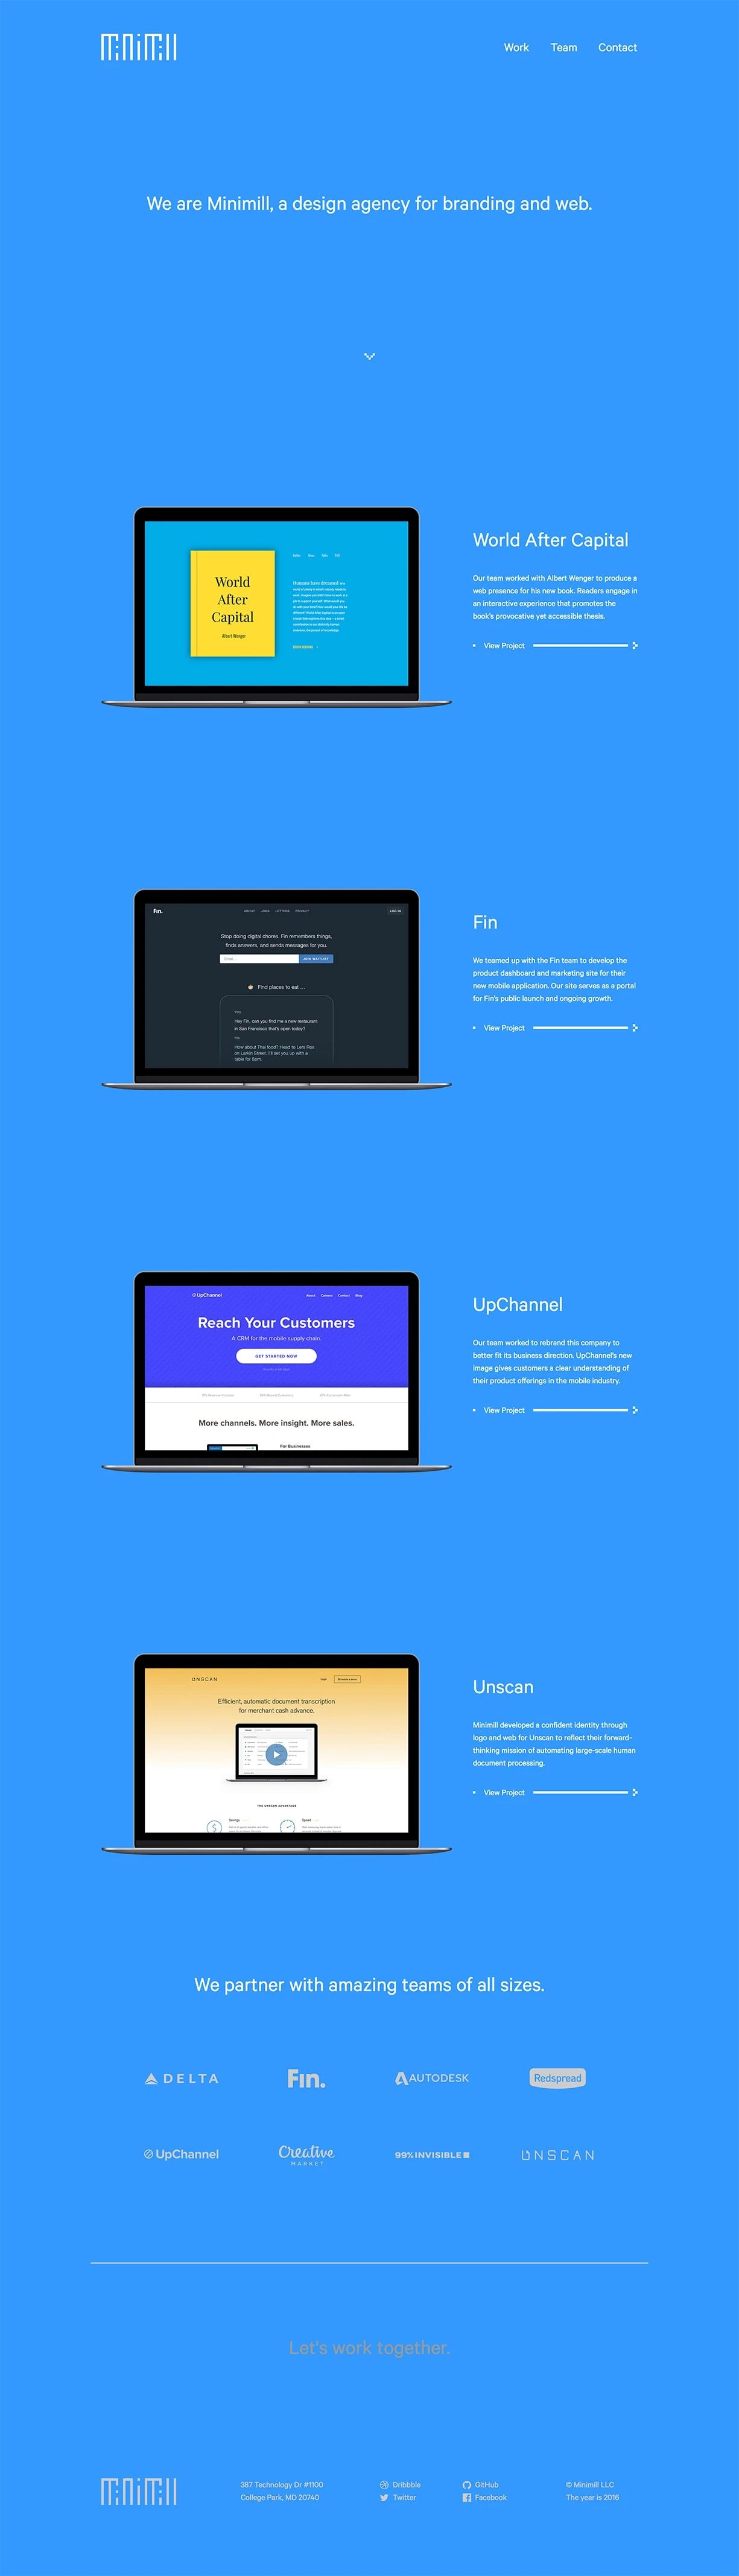 Minimill Landing Page Example: We are Minimill, a design agency for branding and web. Let's work together.